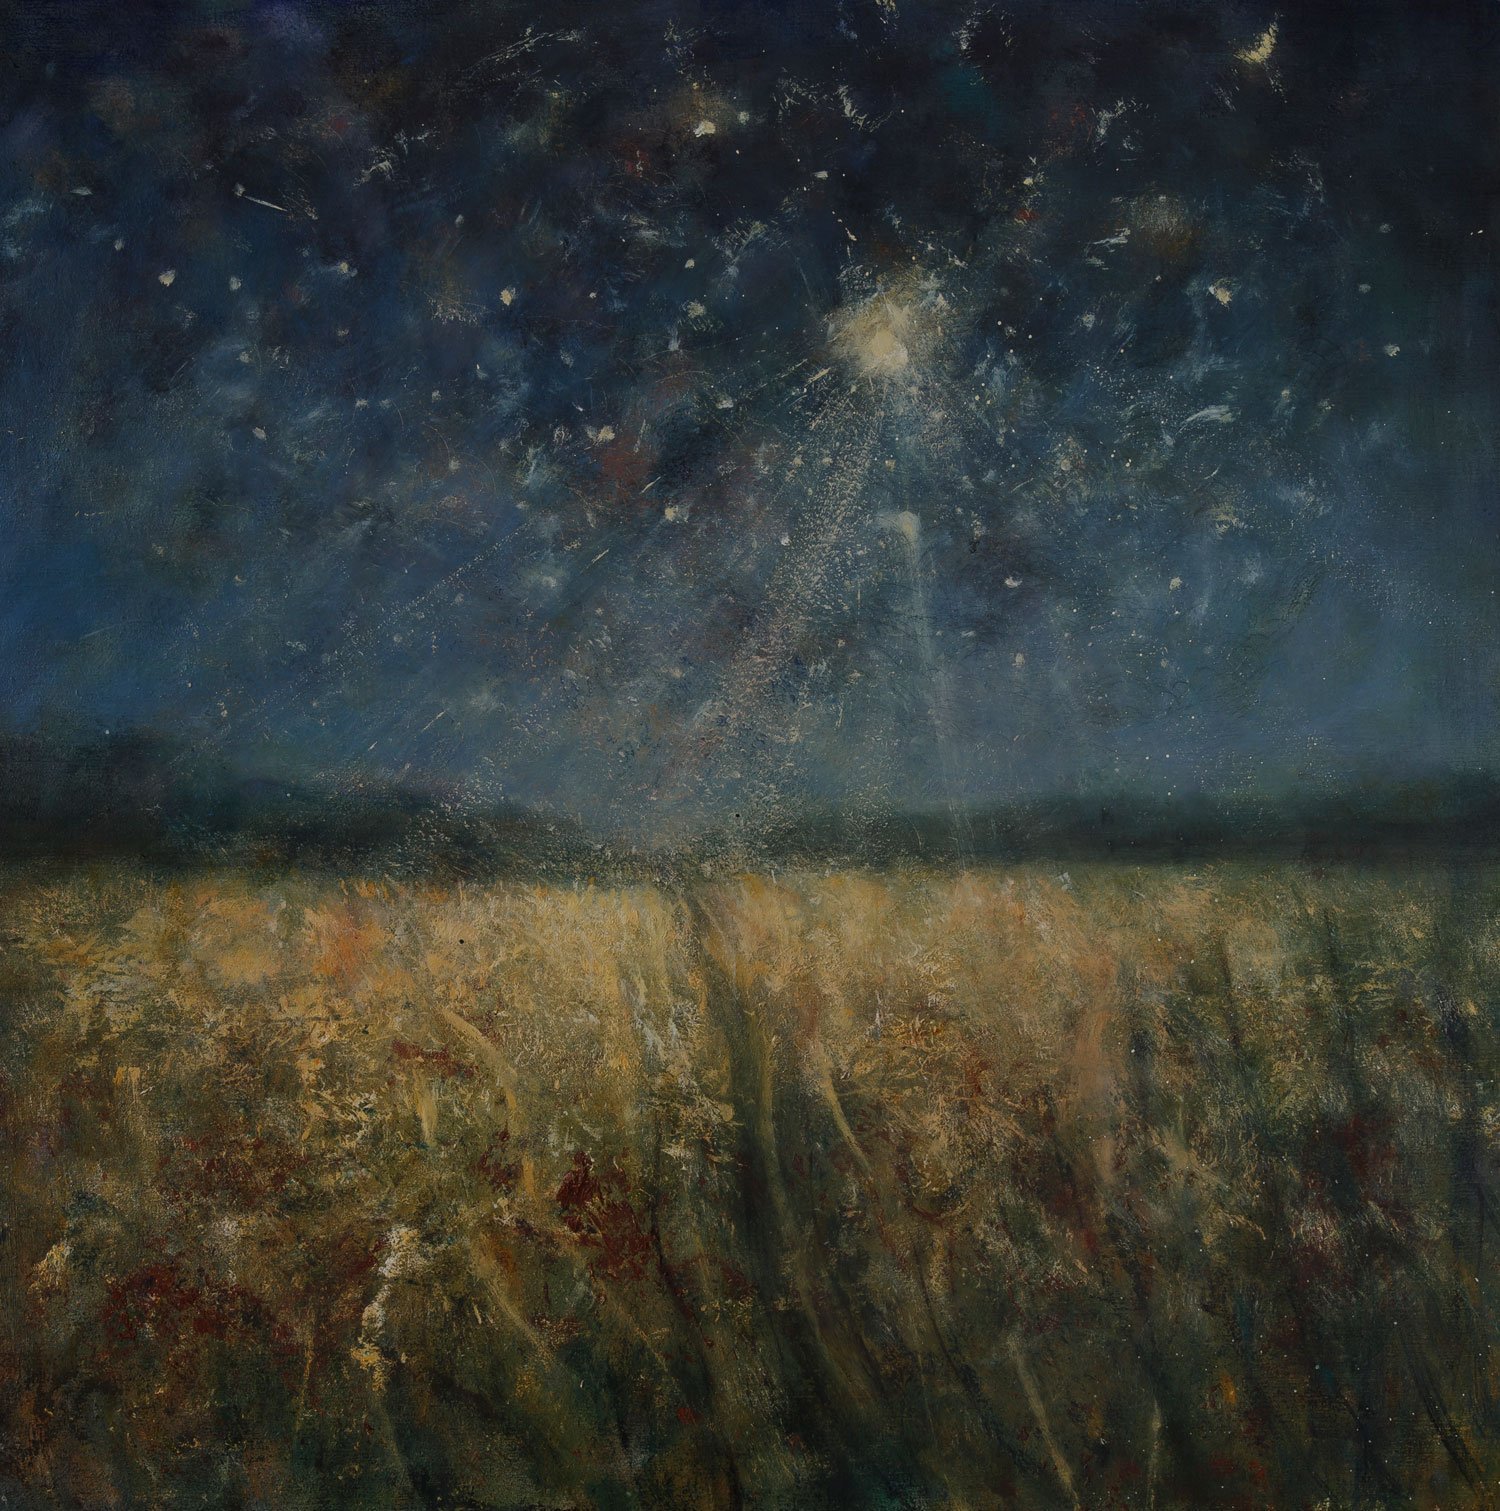 Maize Field and Moonlight (2021)